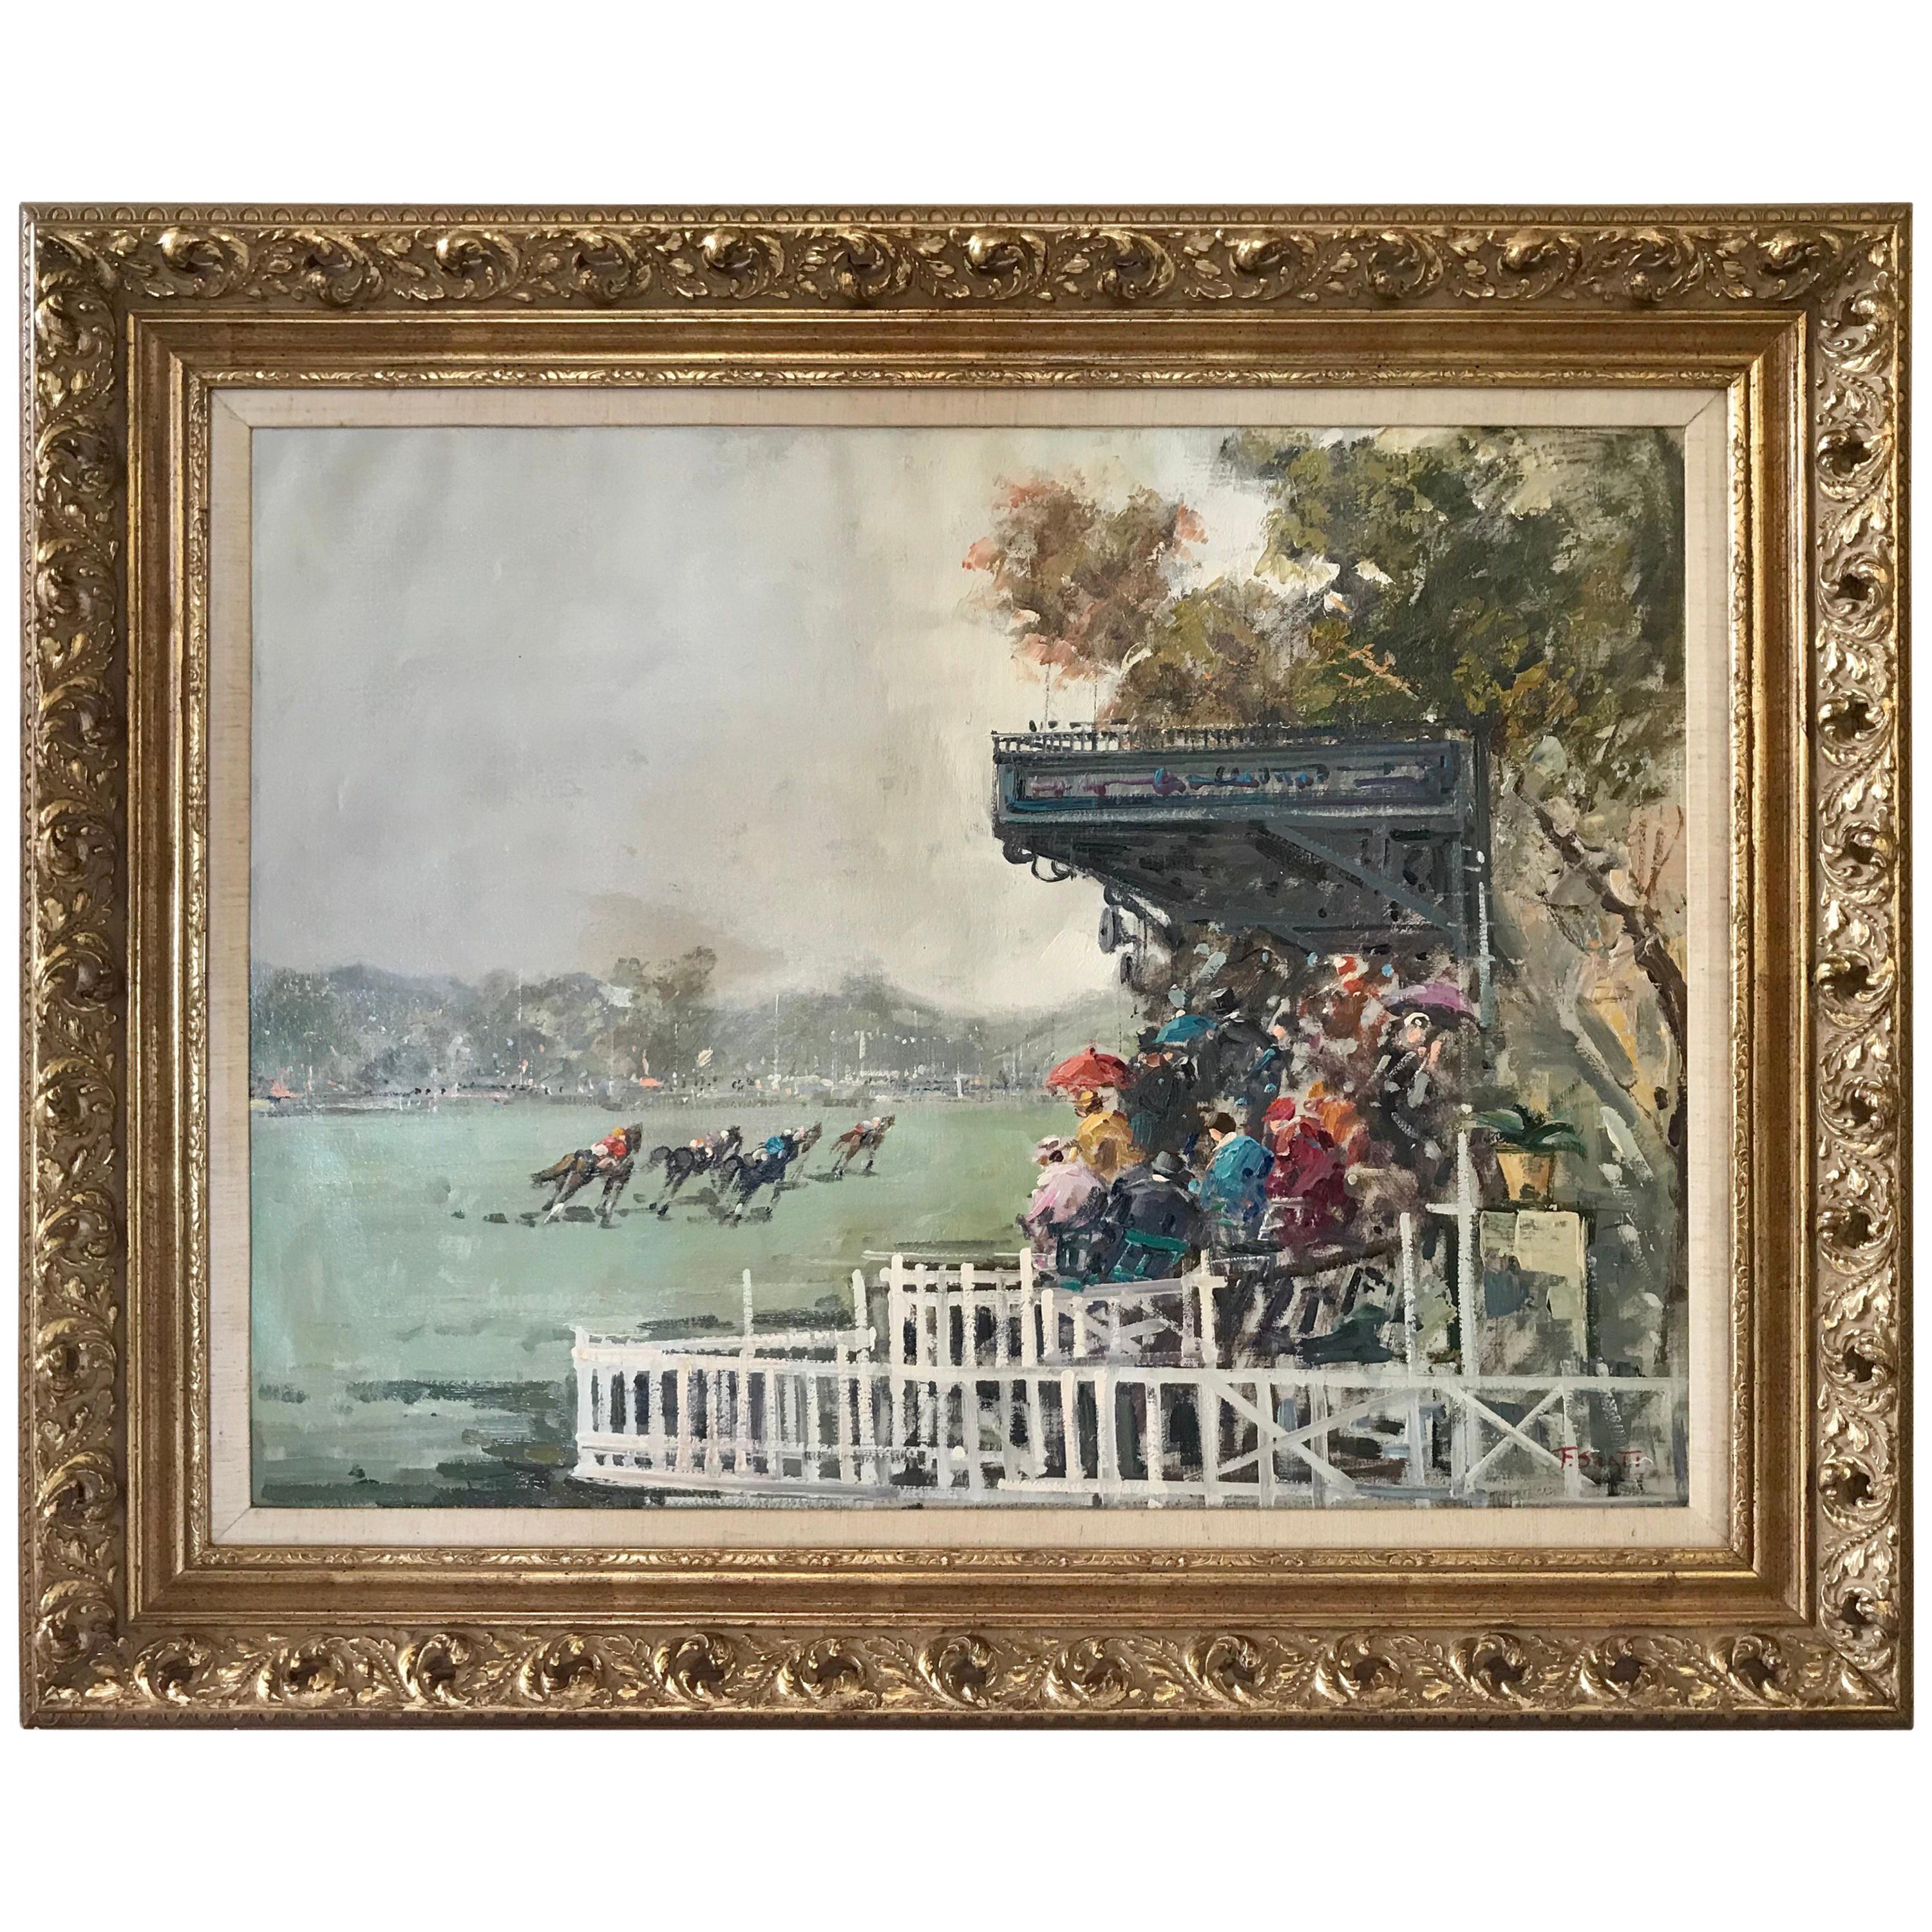 Original Oil Painting Equestrian Horse Races Polo Signed F. Sarti